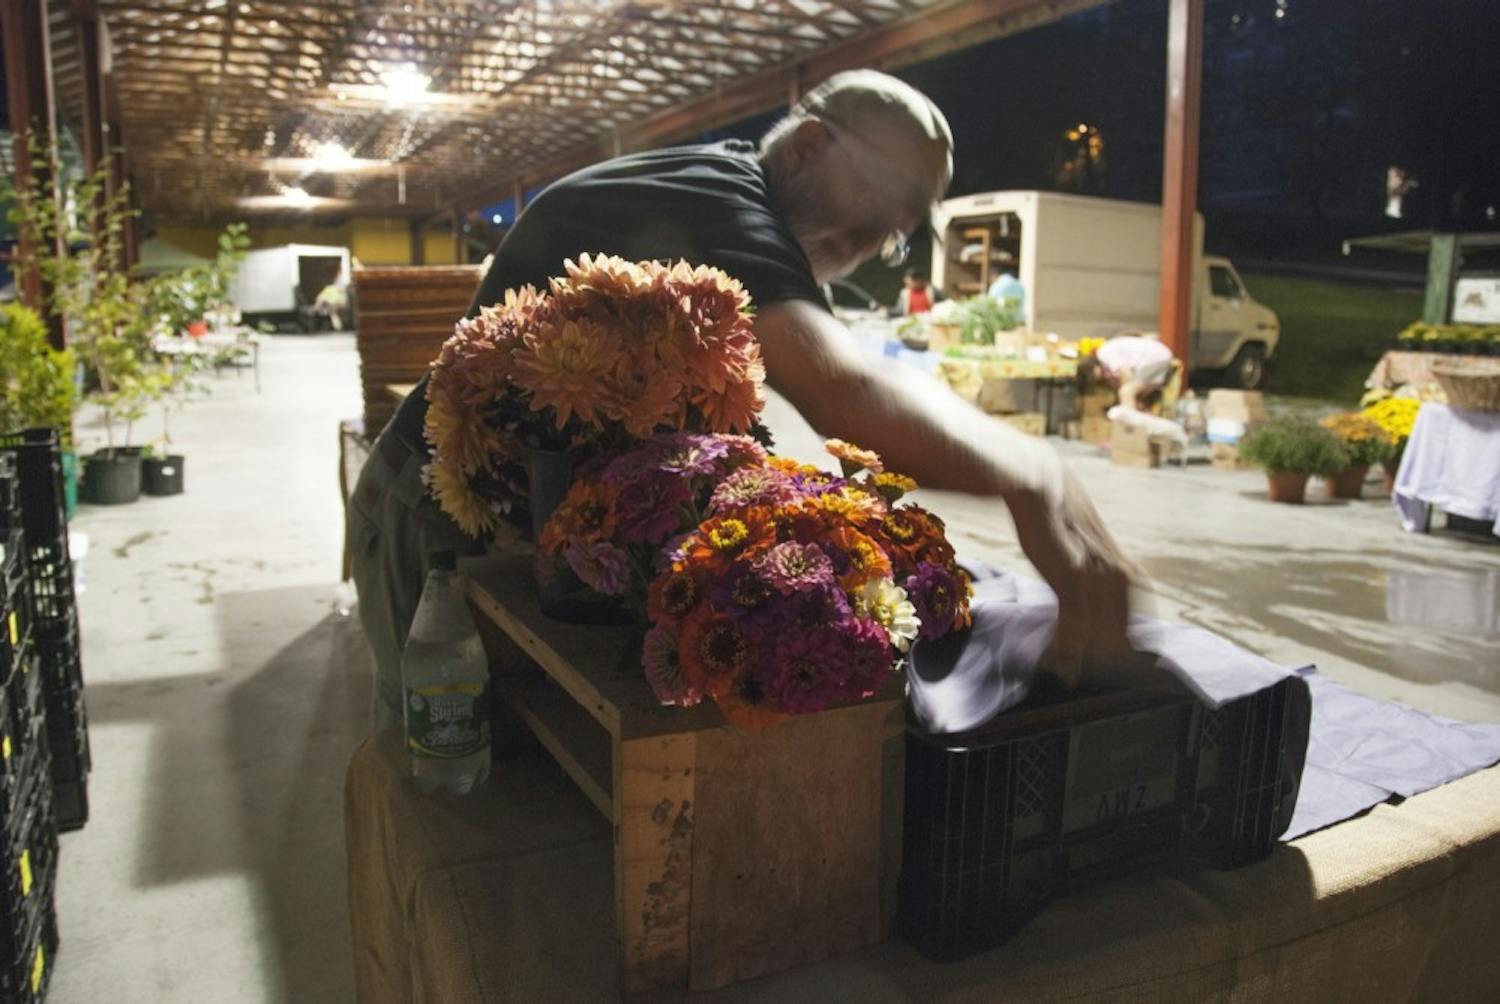 Vendors arrive at the Durham Central Park market before sunrise to set up their stands and arrange produce. For Helga and Tim, each Saturday morning consists of a precisely articulated set-up routine in preparation for their many customers.